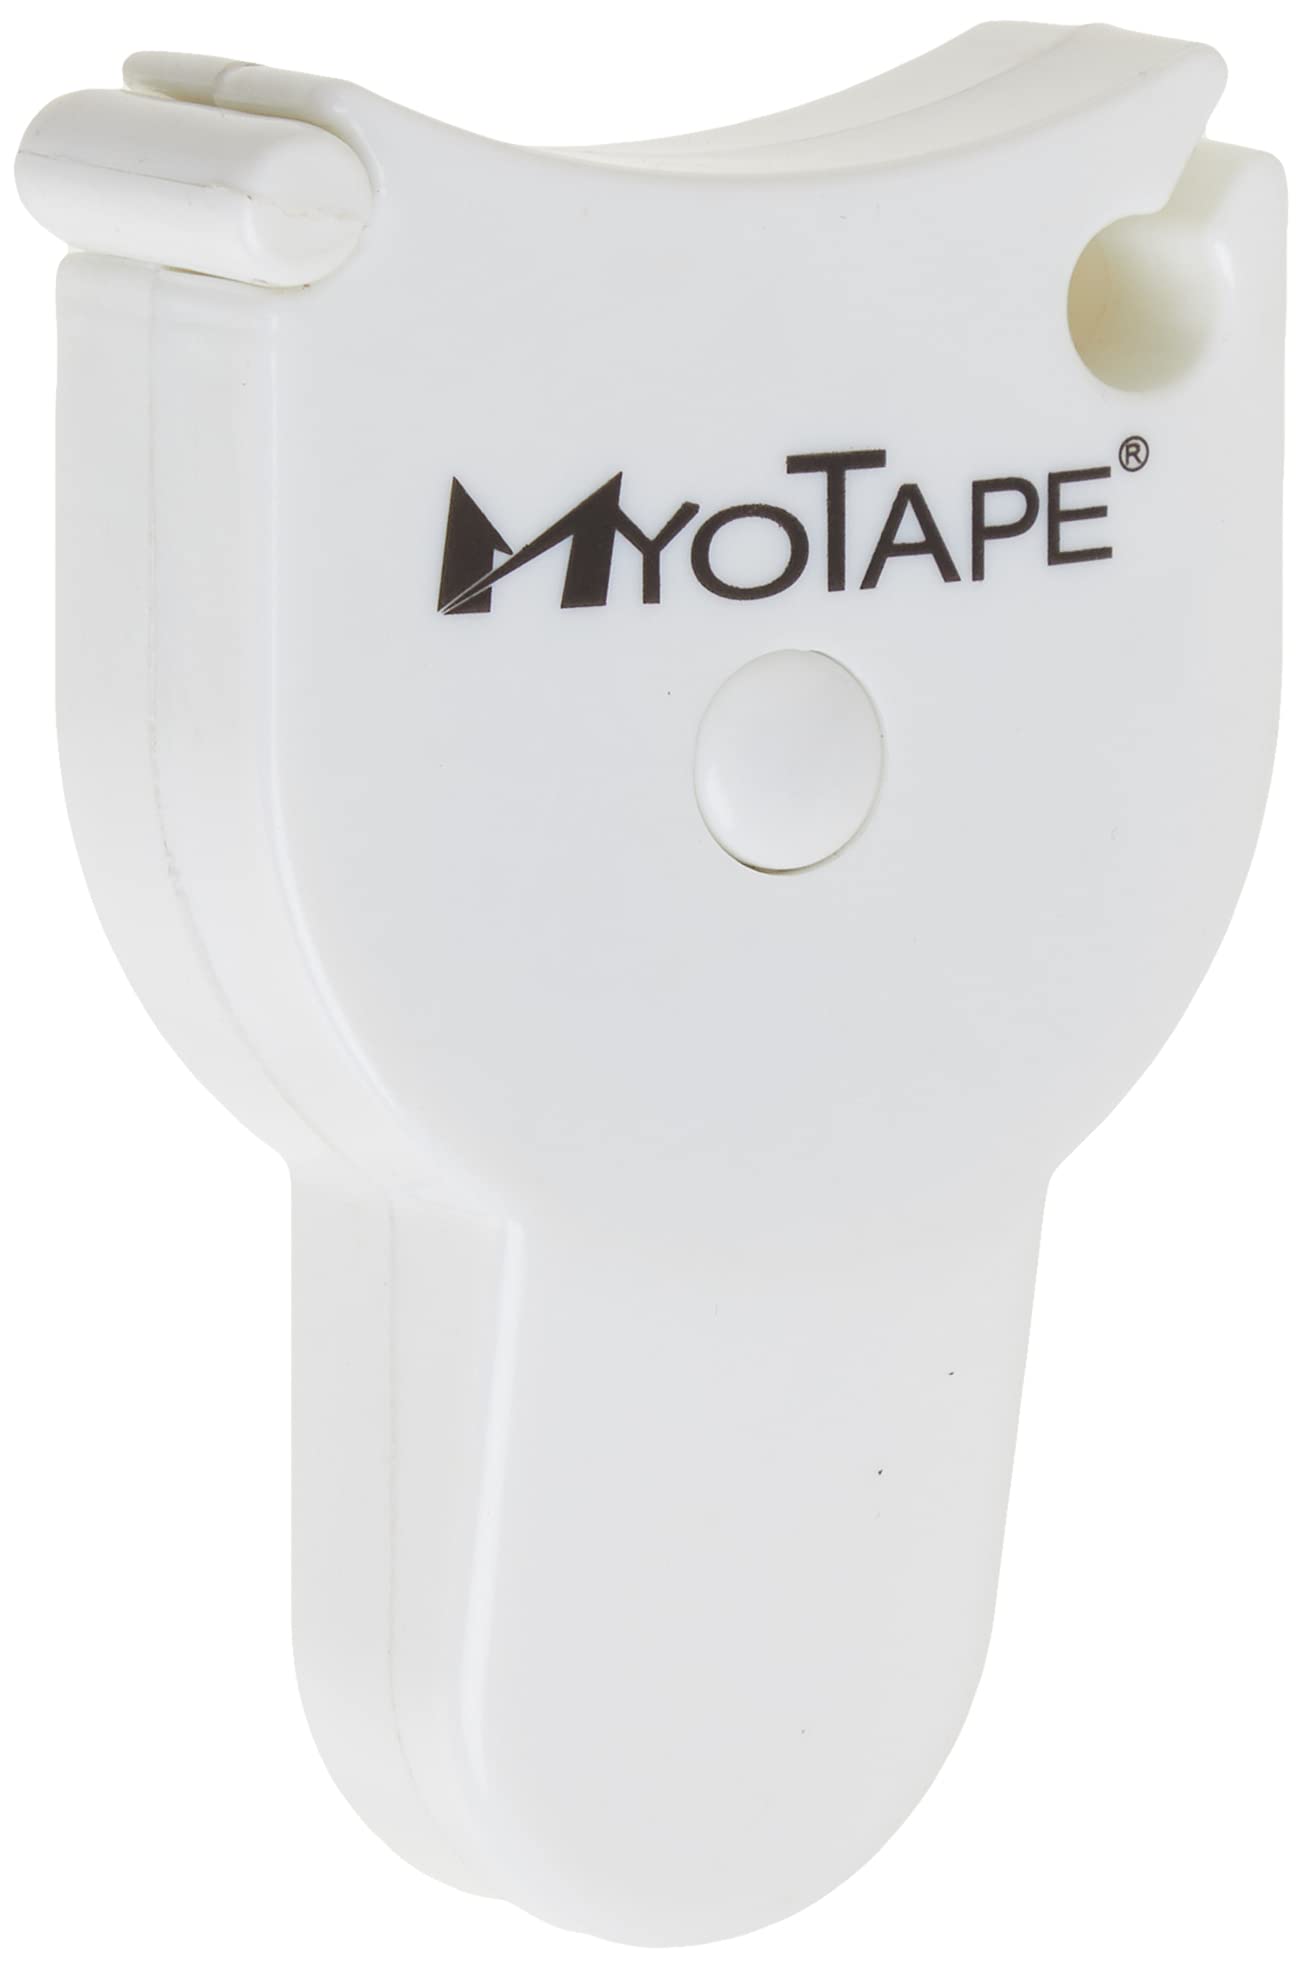 Book Cover MyoTape Body Measure Tape - Arms Chest Thigh or Waist Measuring Tape for Personal Trainer or Home Fitness Goals